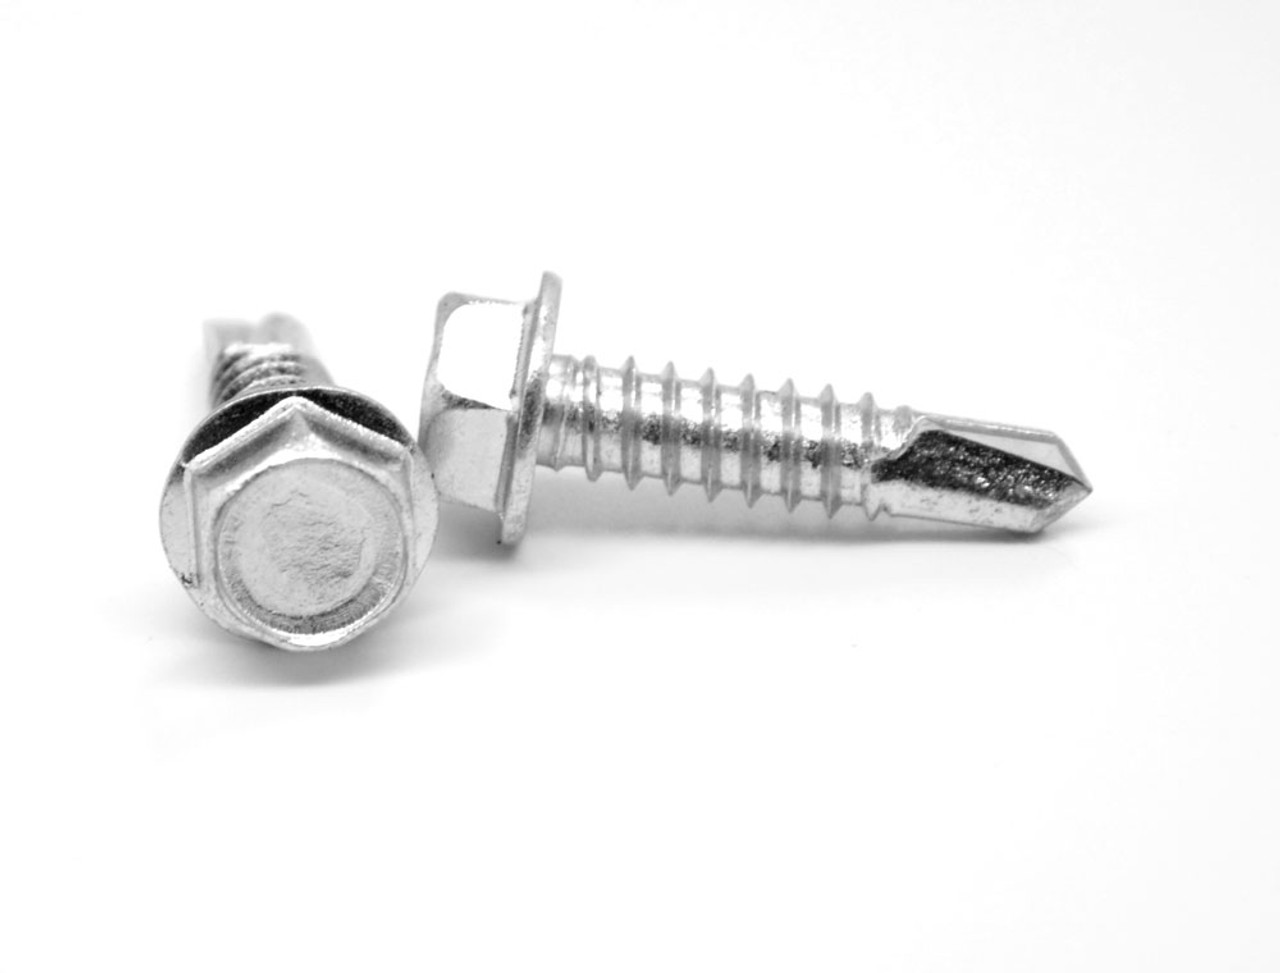 #10-16 x 1/2" (FT) Self Drilling Screw Hex Washer Head #2 Point Stainless Steel 18-8